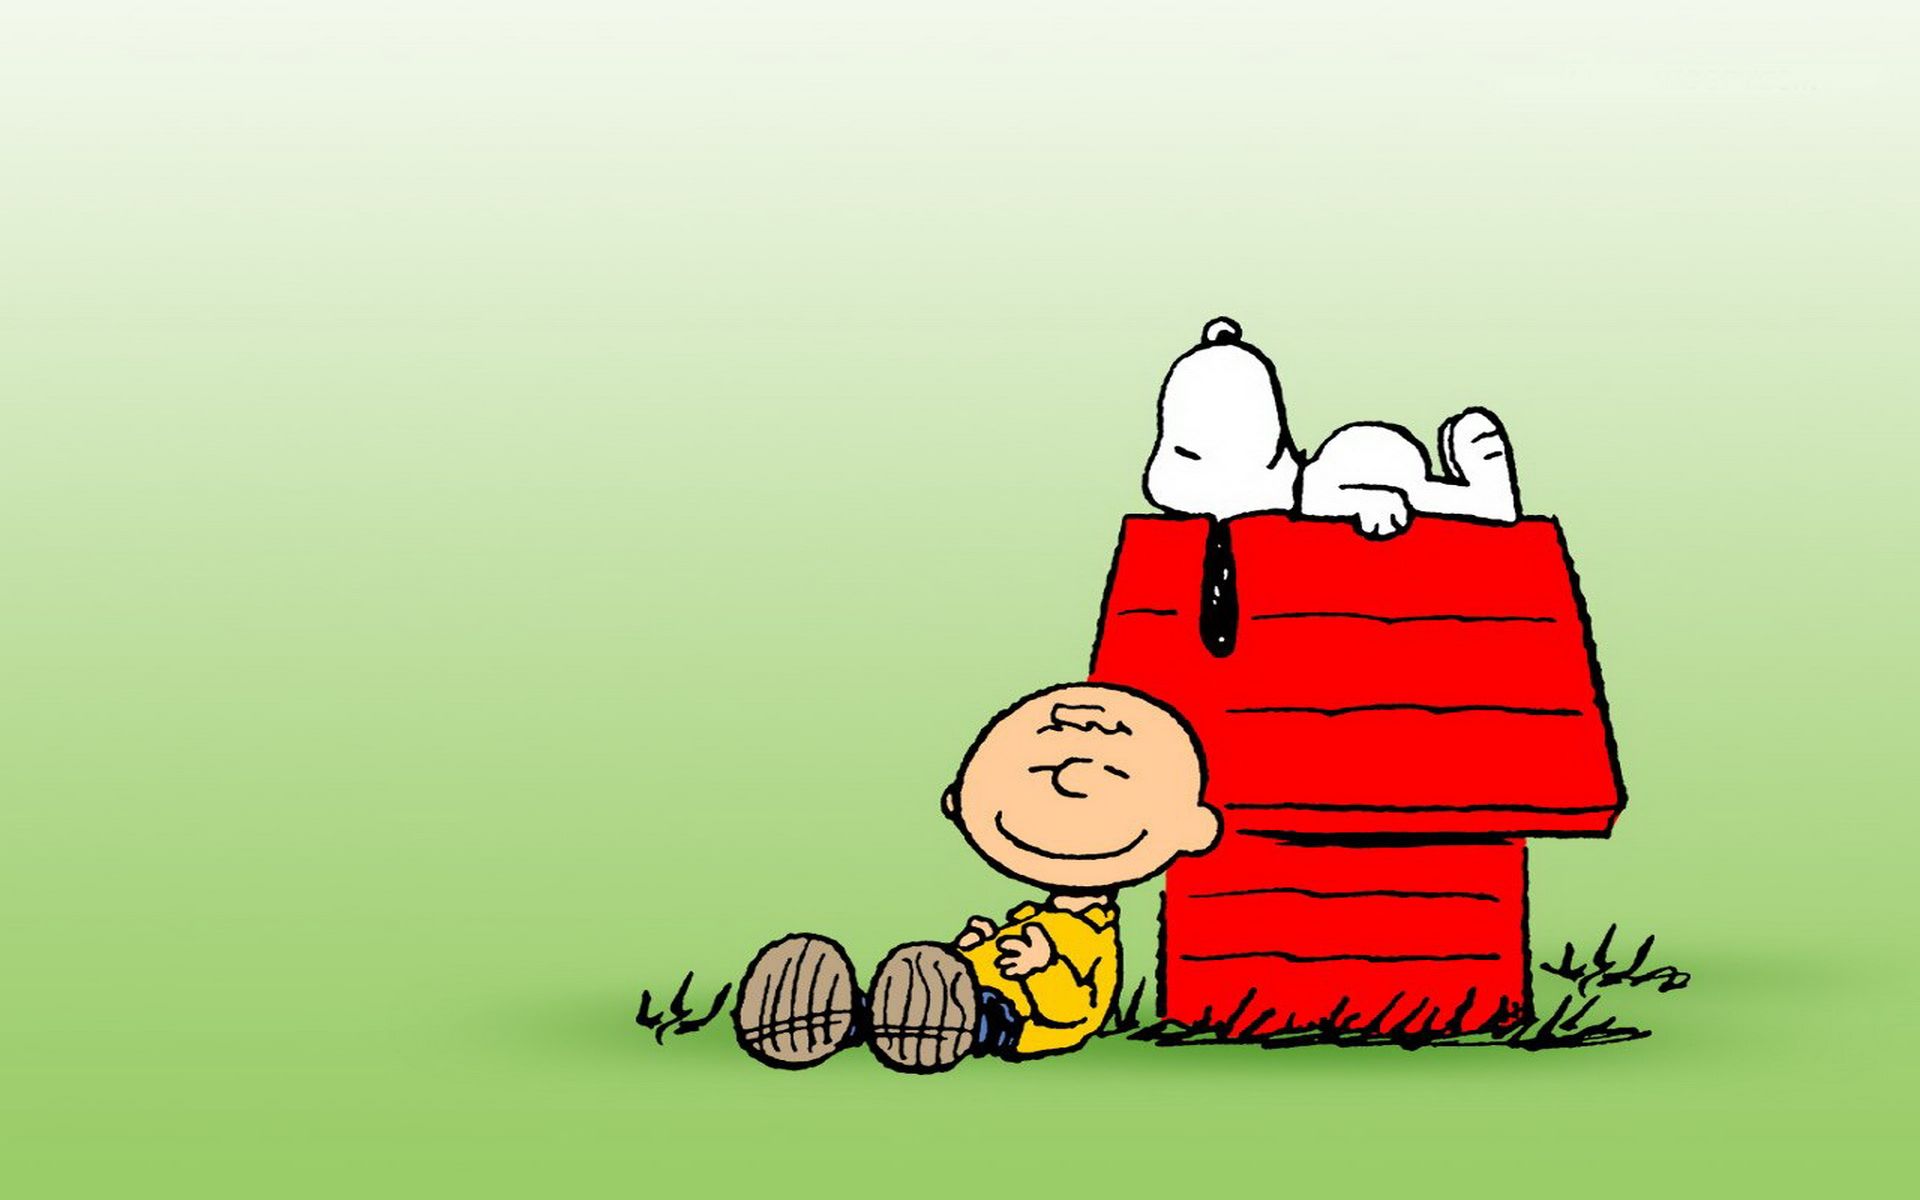 Peanut Snoopy 2015 Wallpaper and Images | Cool Wallpapers